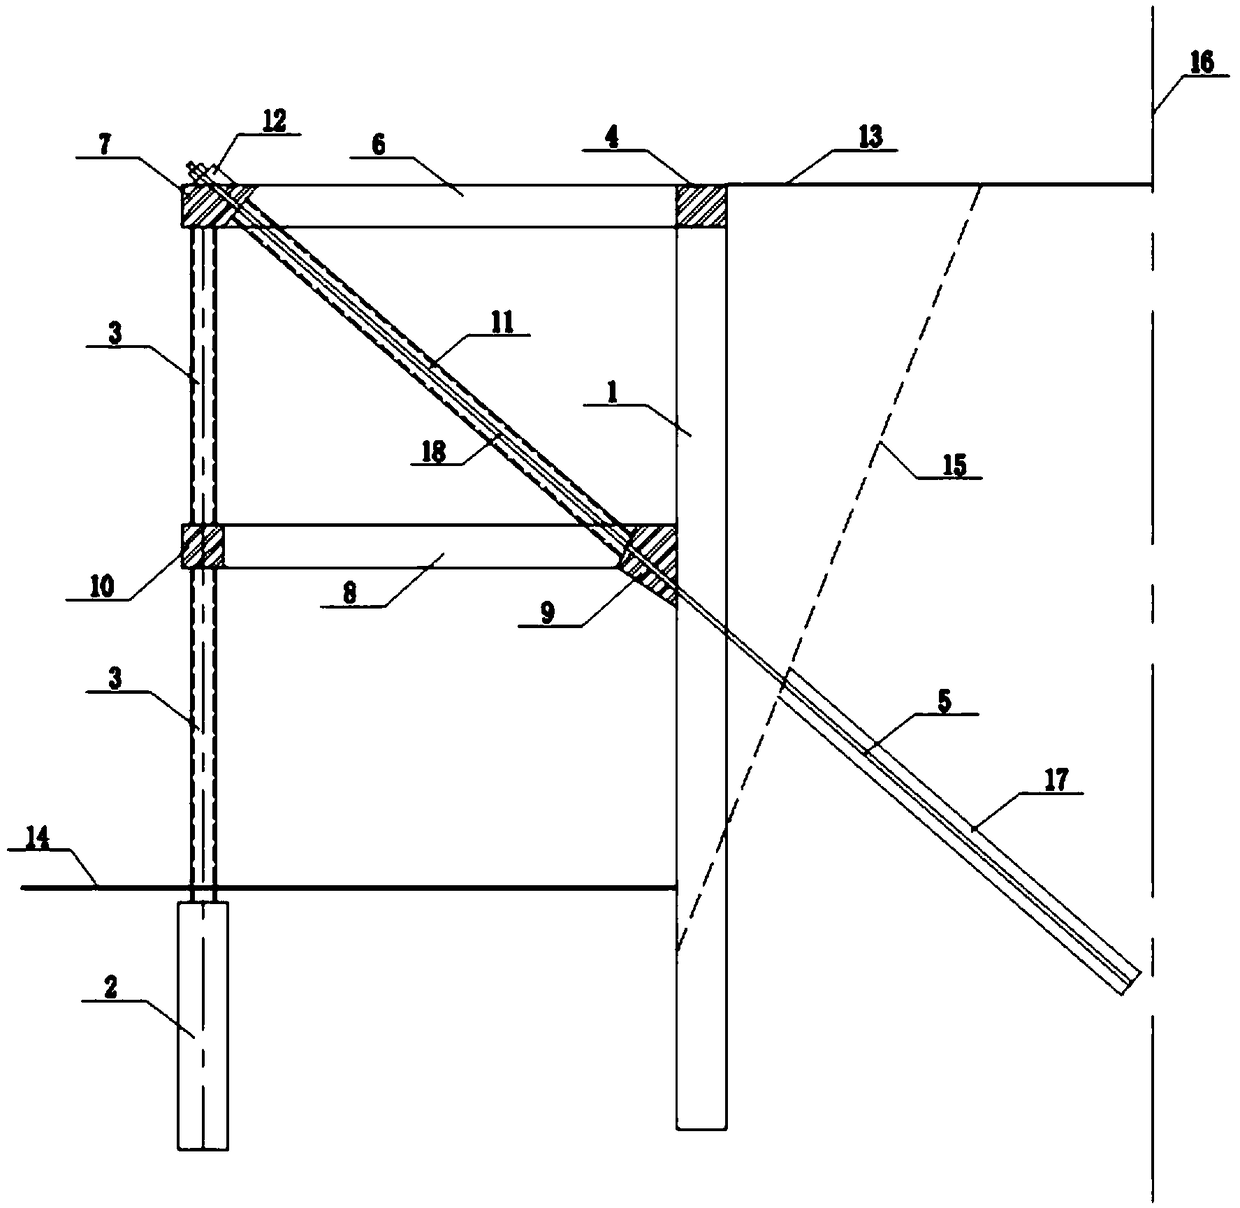 A truss-anchor support structure for foundation pit support